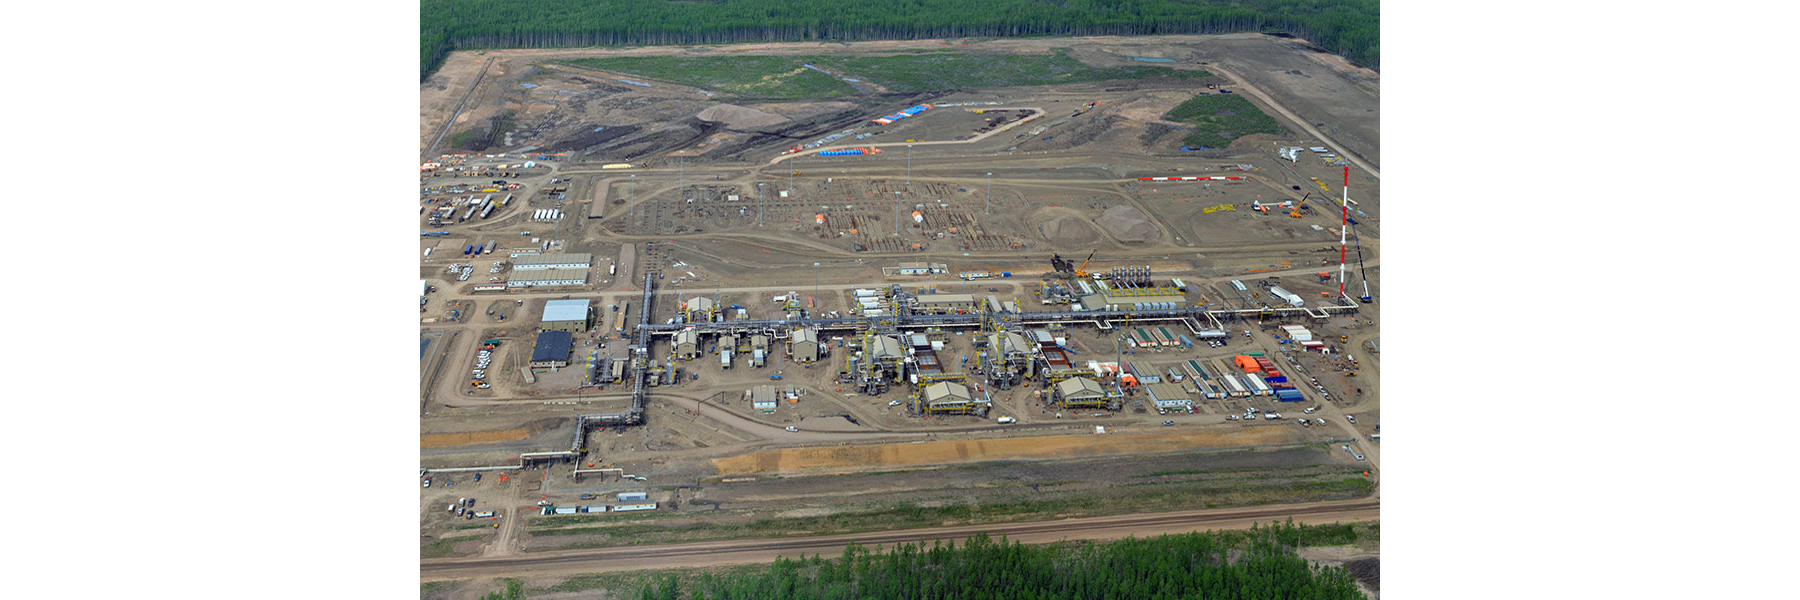 Aerial view of the Cabin Gas Plant 1&2